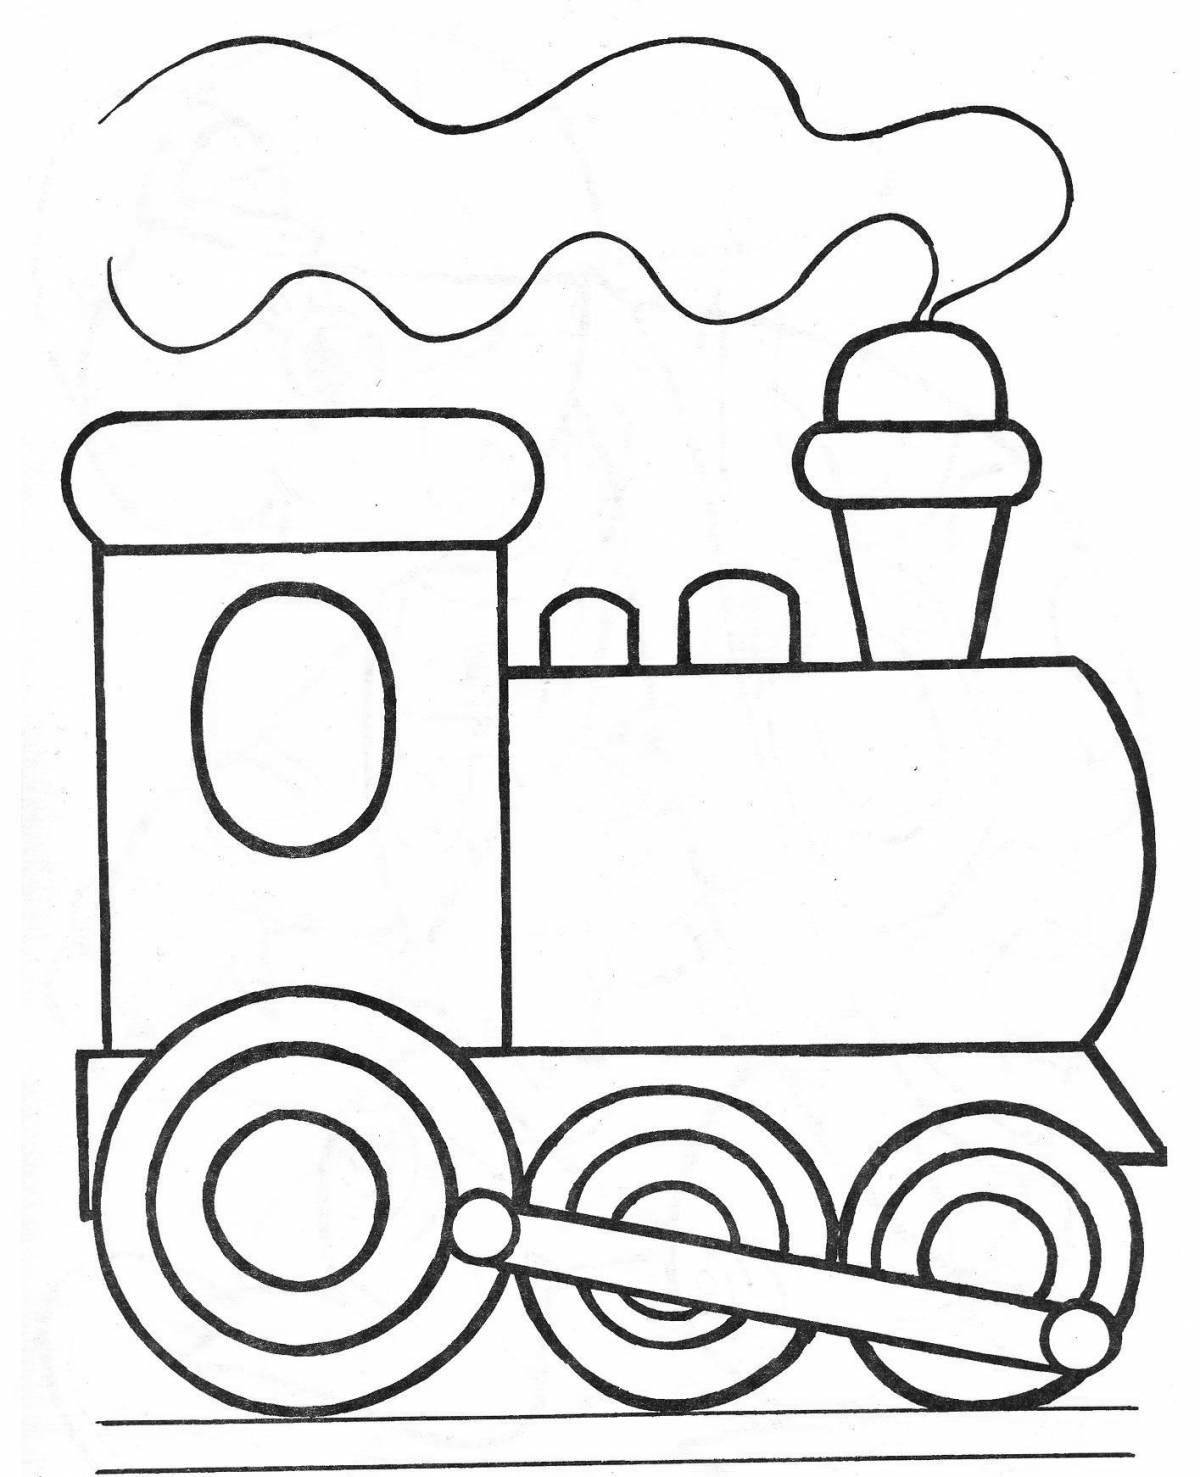 Color-frenzy coloring page for babies 3-4 years old